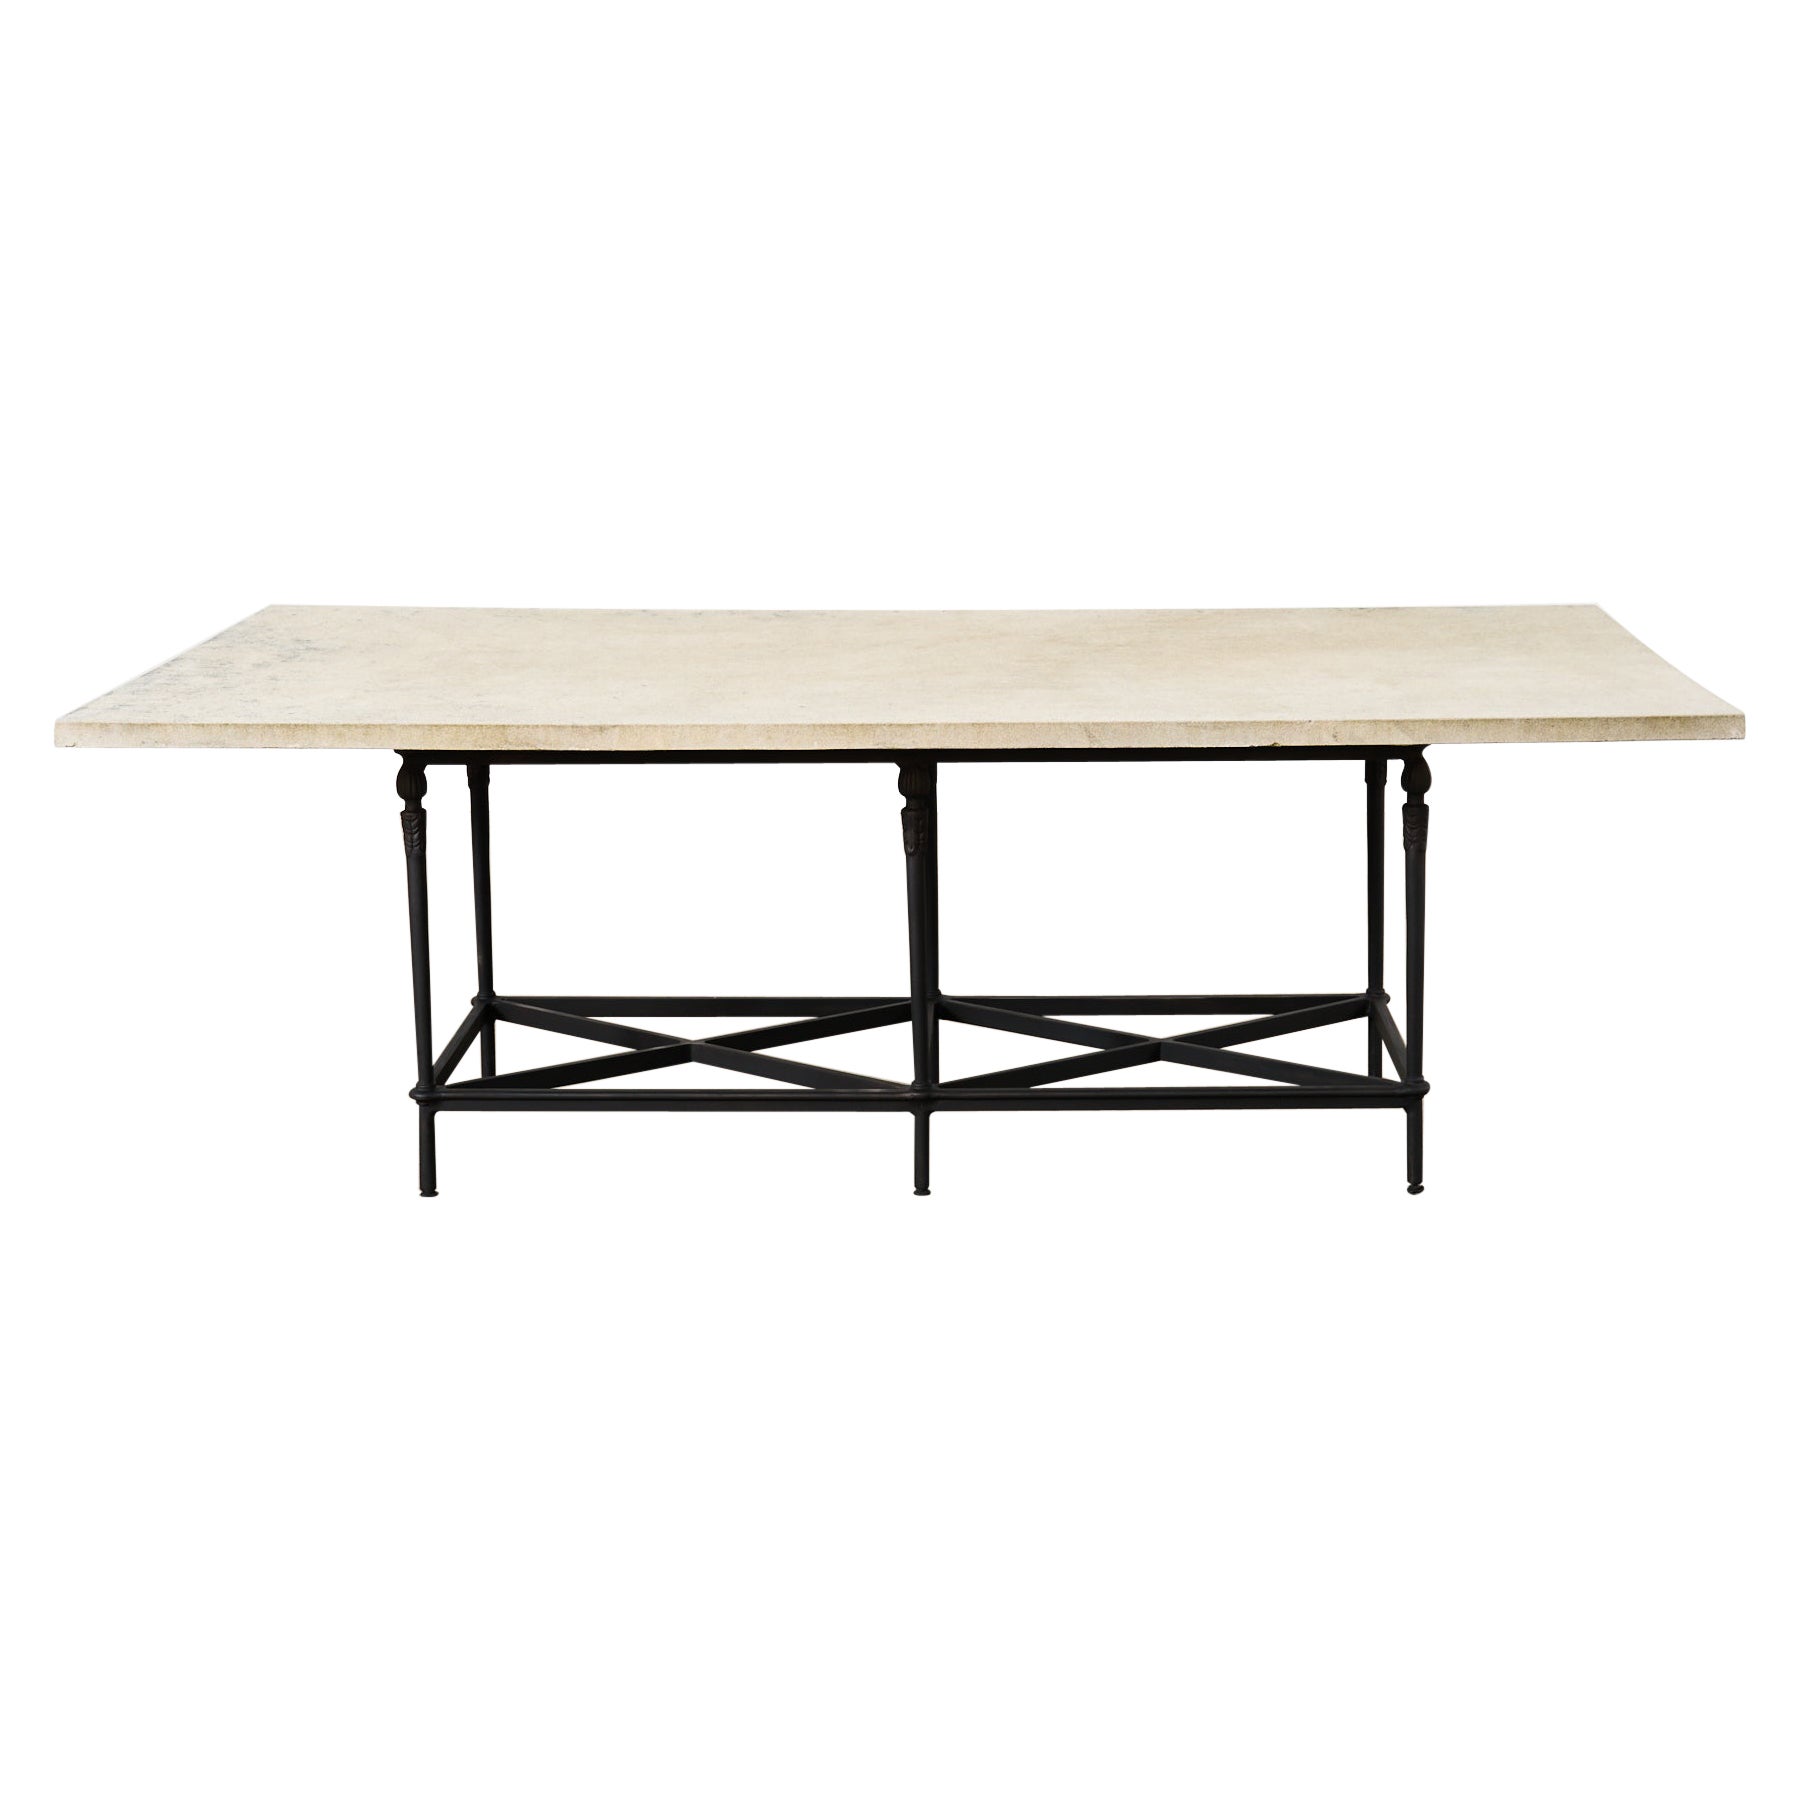 Michael Taylor Montecito Stone Top Garden Dining Table  For Sale